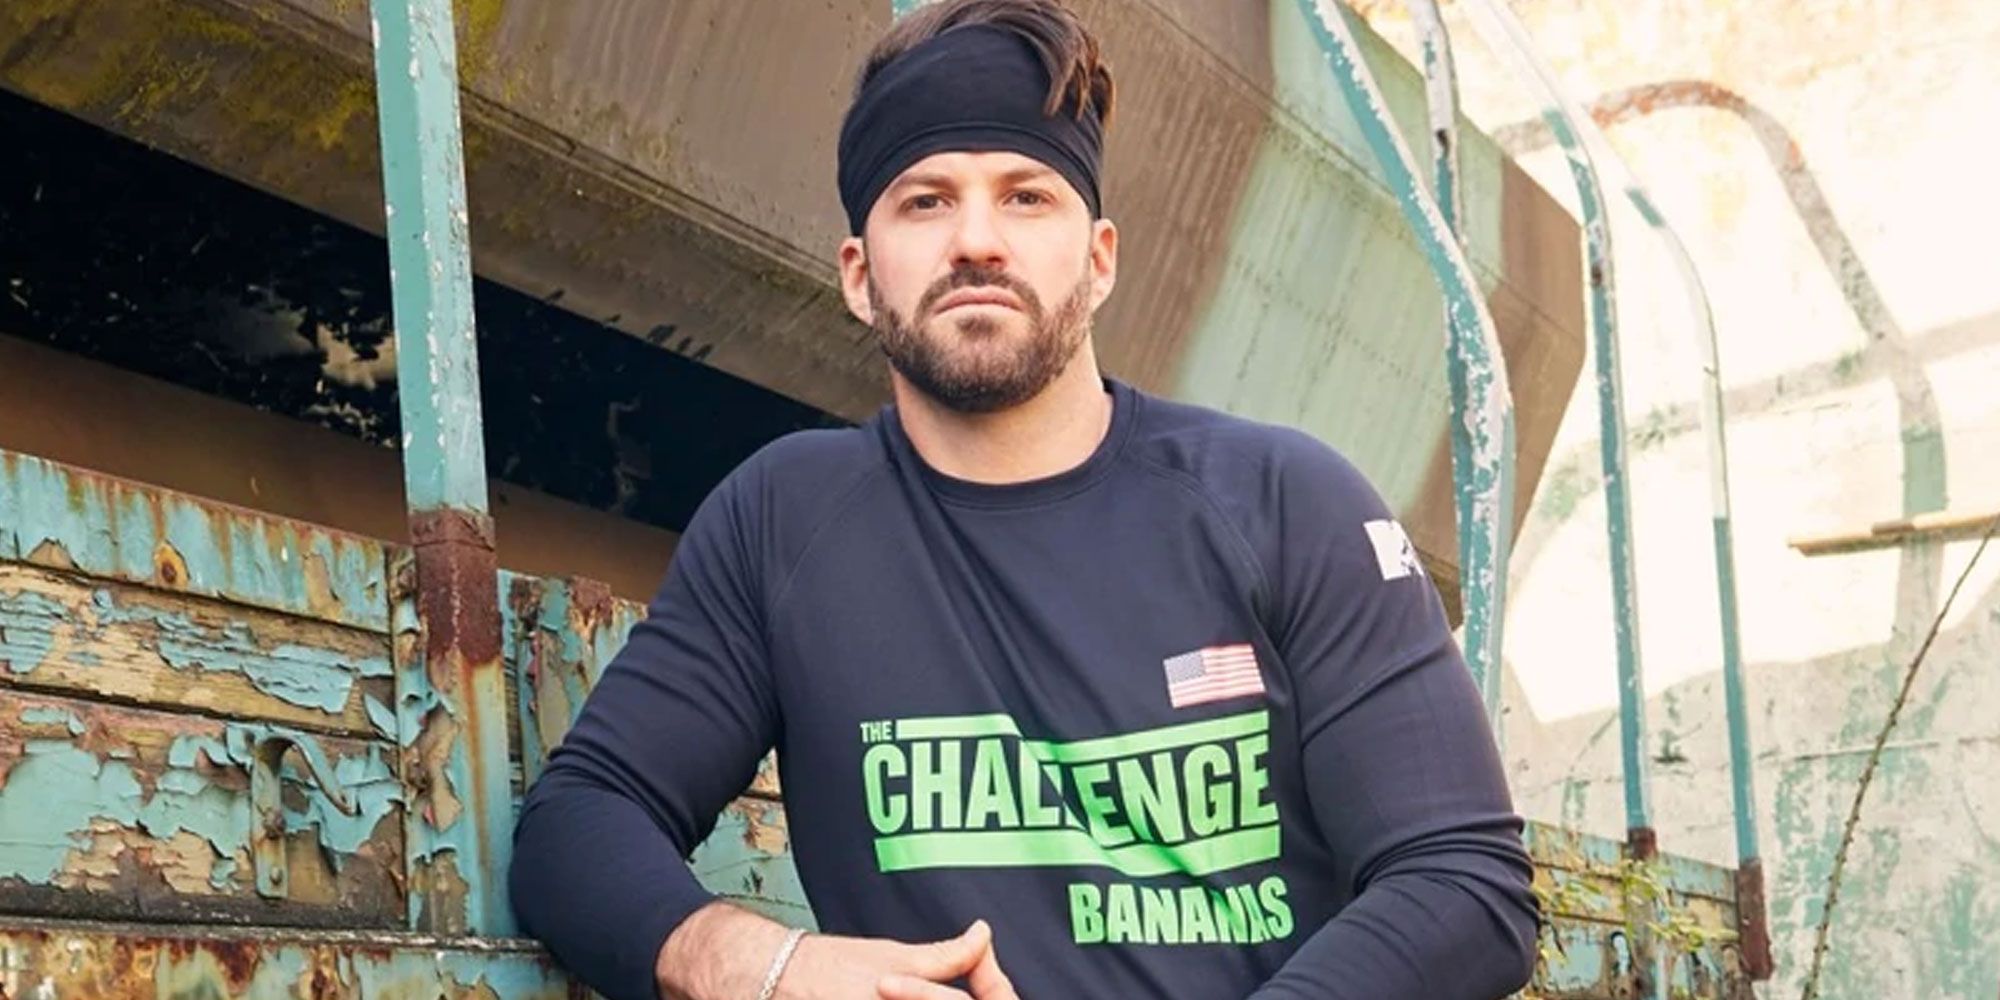 Johnny “Bananas” Devenanzio on The Challenge wearing a The Challenge t-shirt